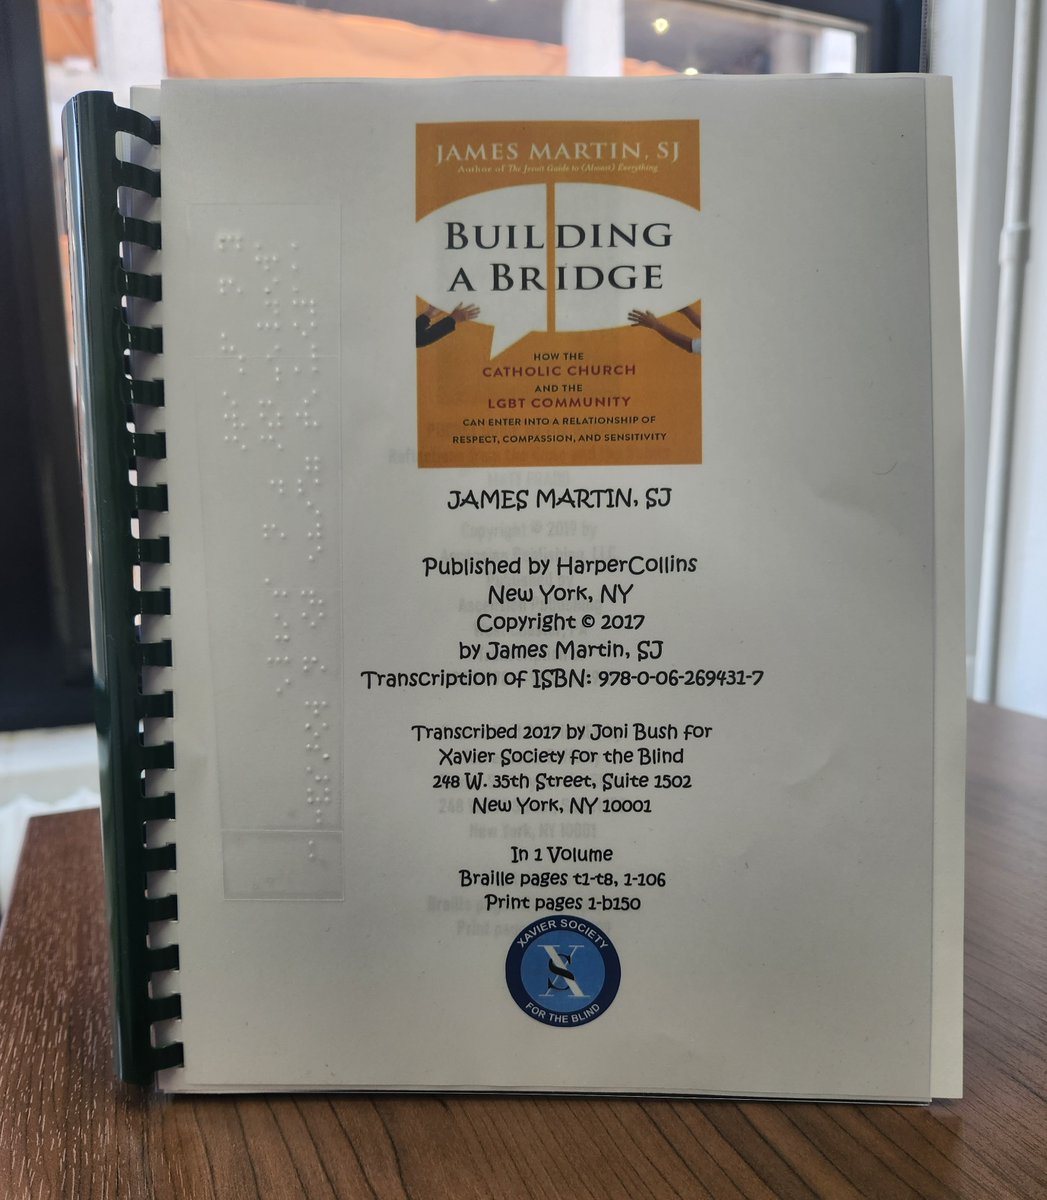 Donna McG. in @AustinDiocese requested 'Building a Bridge: How the Catholic Church Can Enter into a Relationship of Respect, Compassion and Sensitivity' by @JamesMartinSJ in #braille

This book offers a loving voice in a time marked by anger & divisiveness. #BlindTwitter